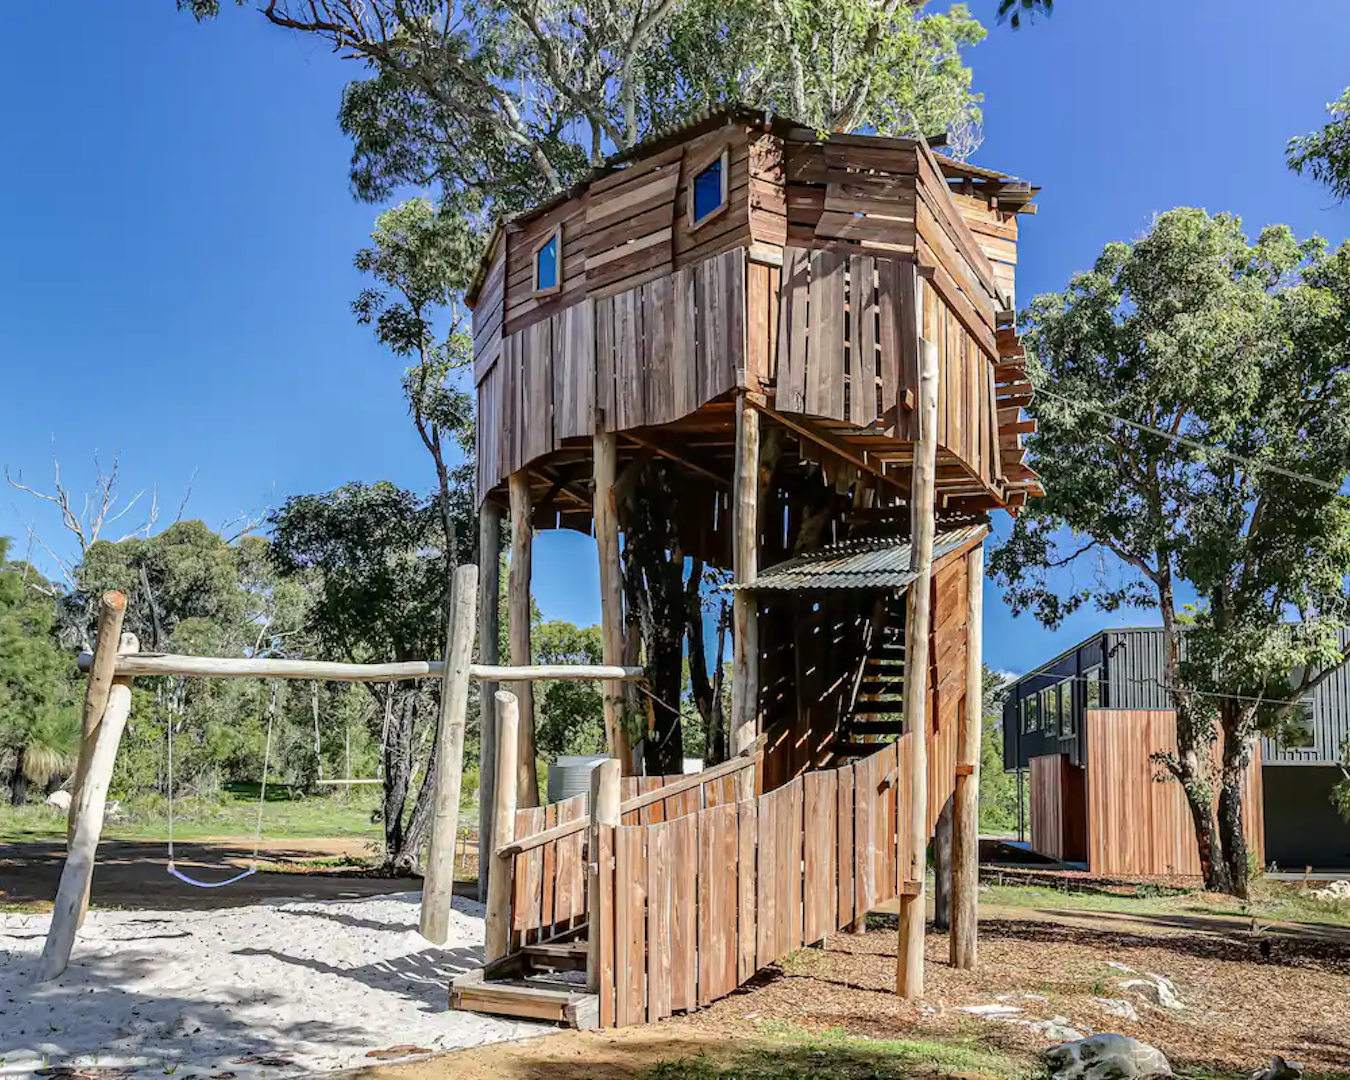 A treehouse at a WA Airbnb